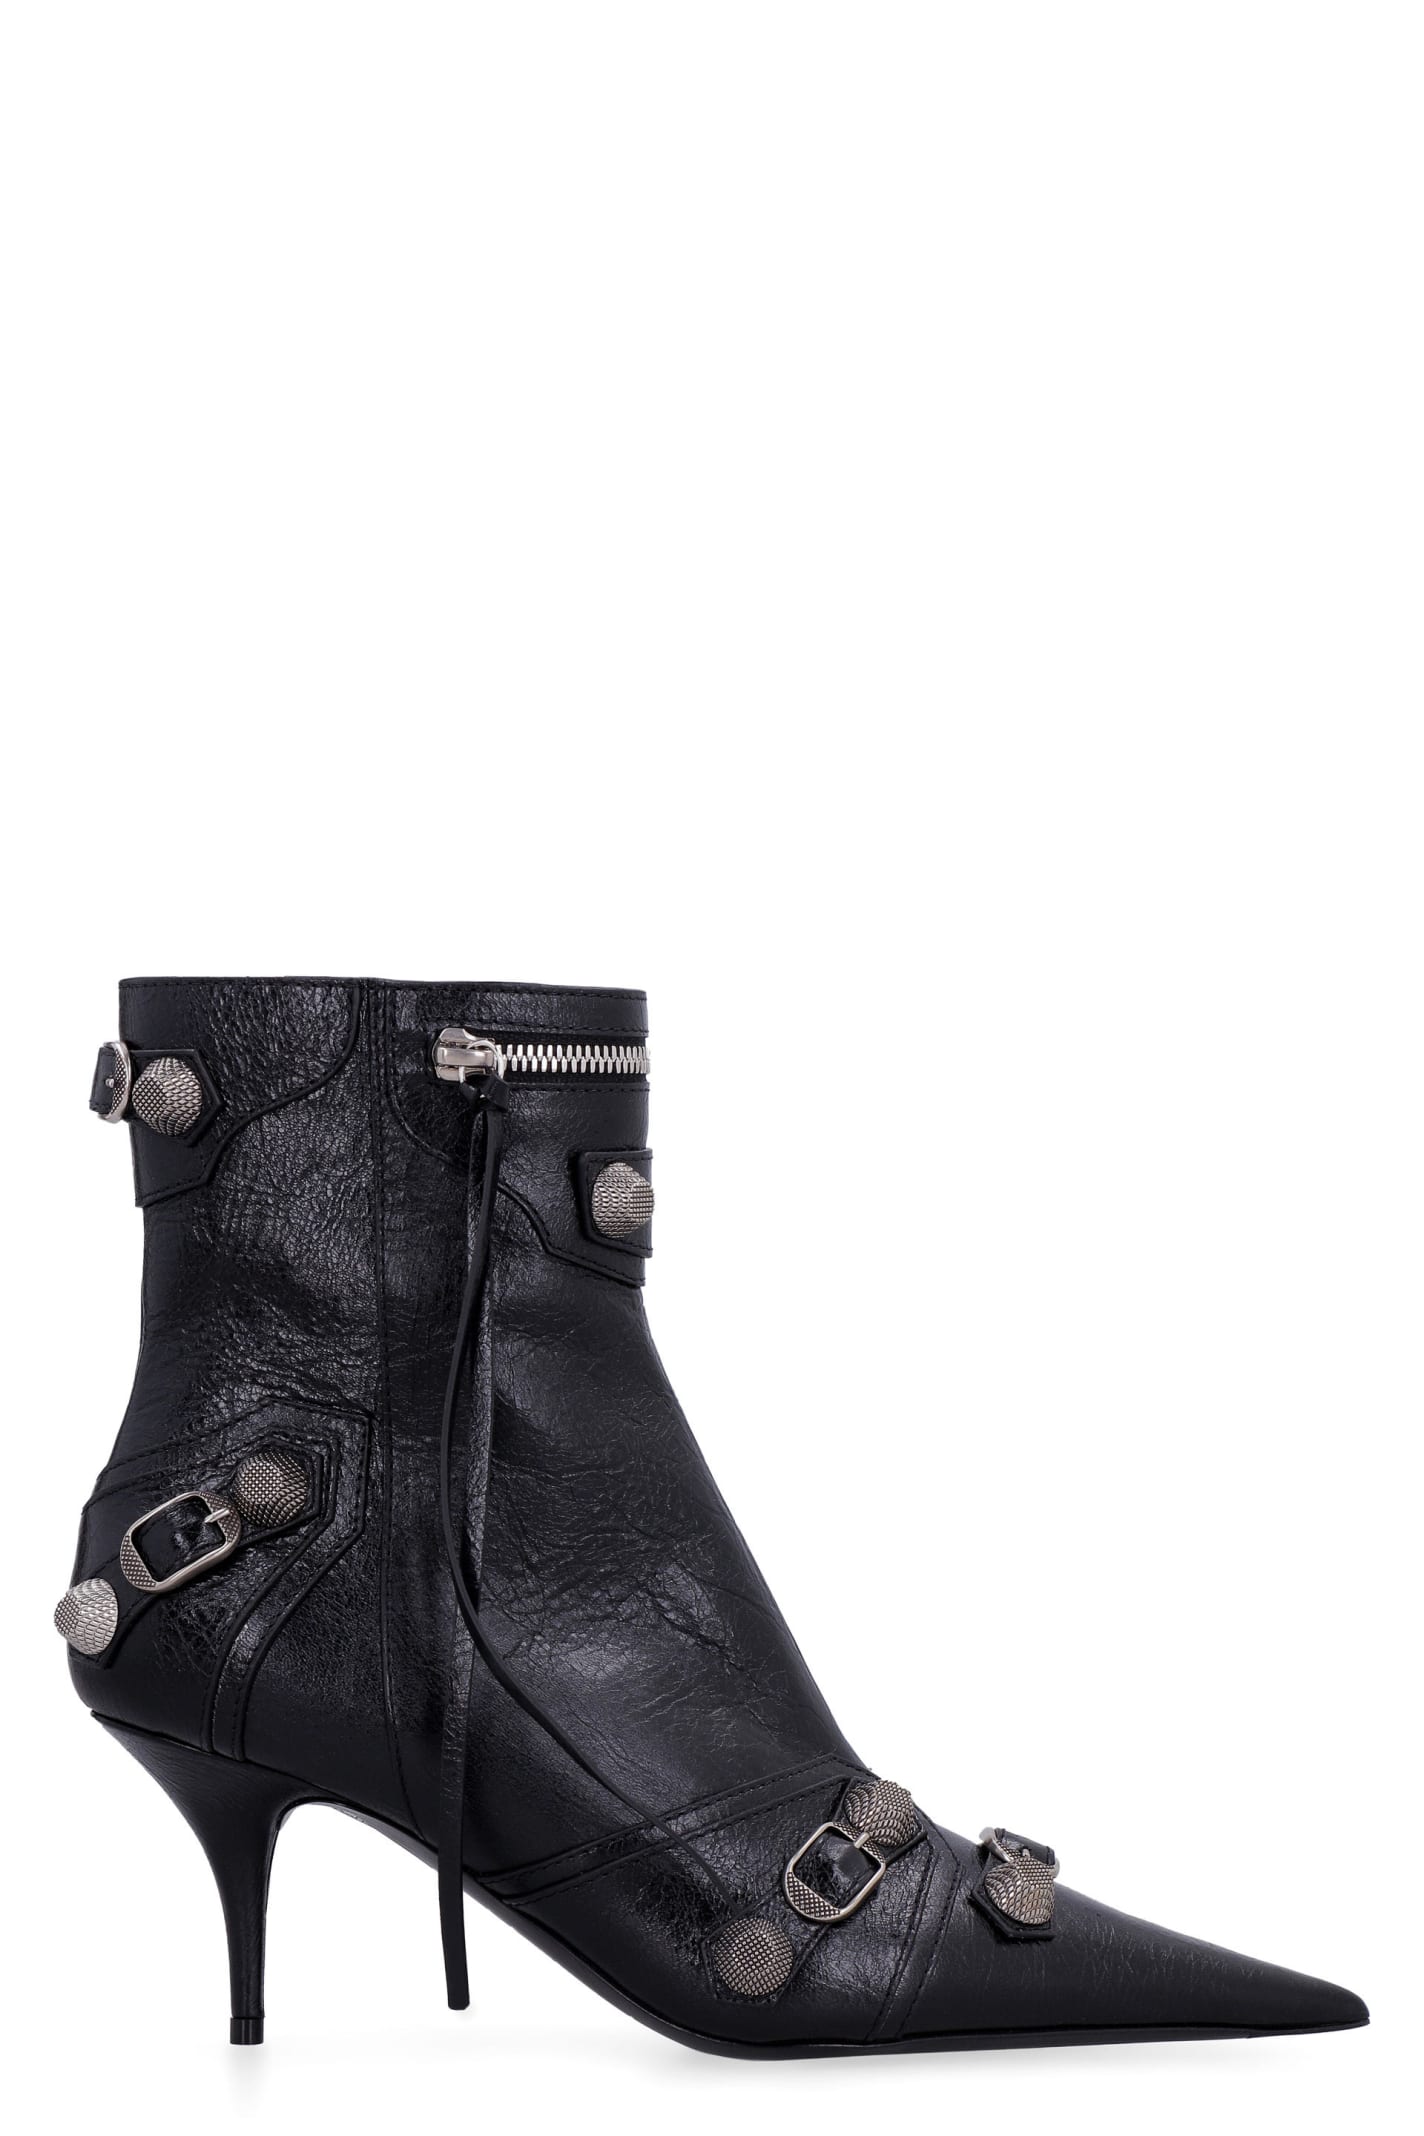 Cagole Patent Pointy Toe Ankle Boots